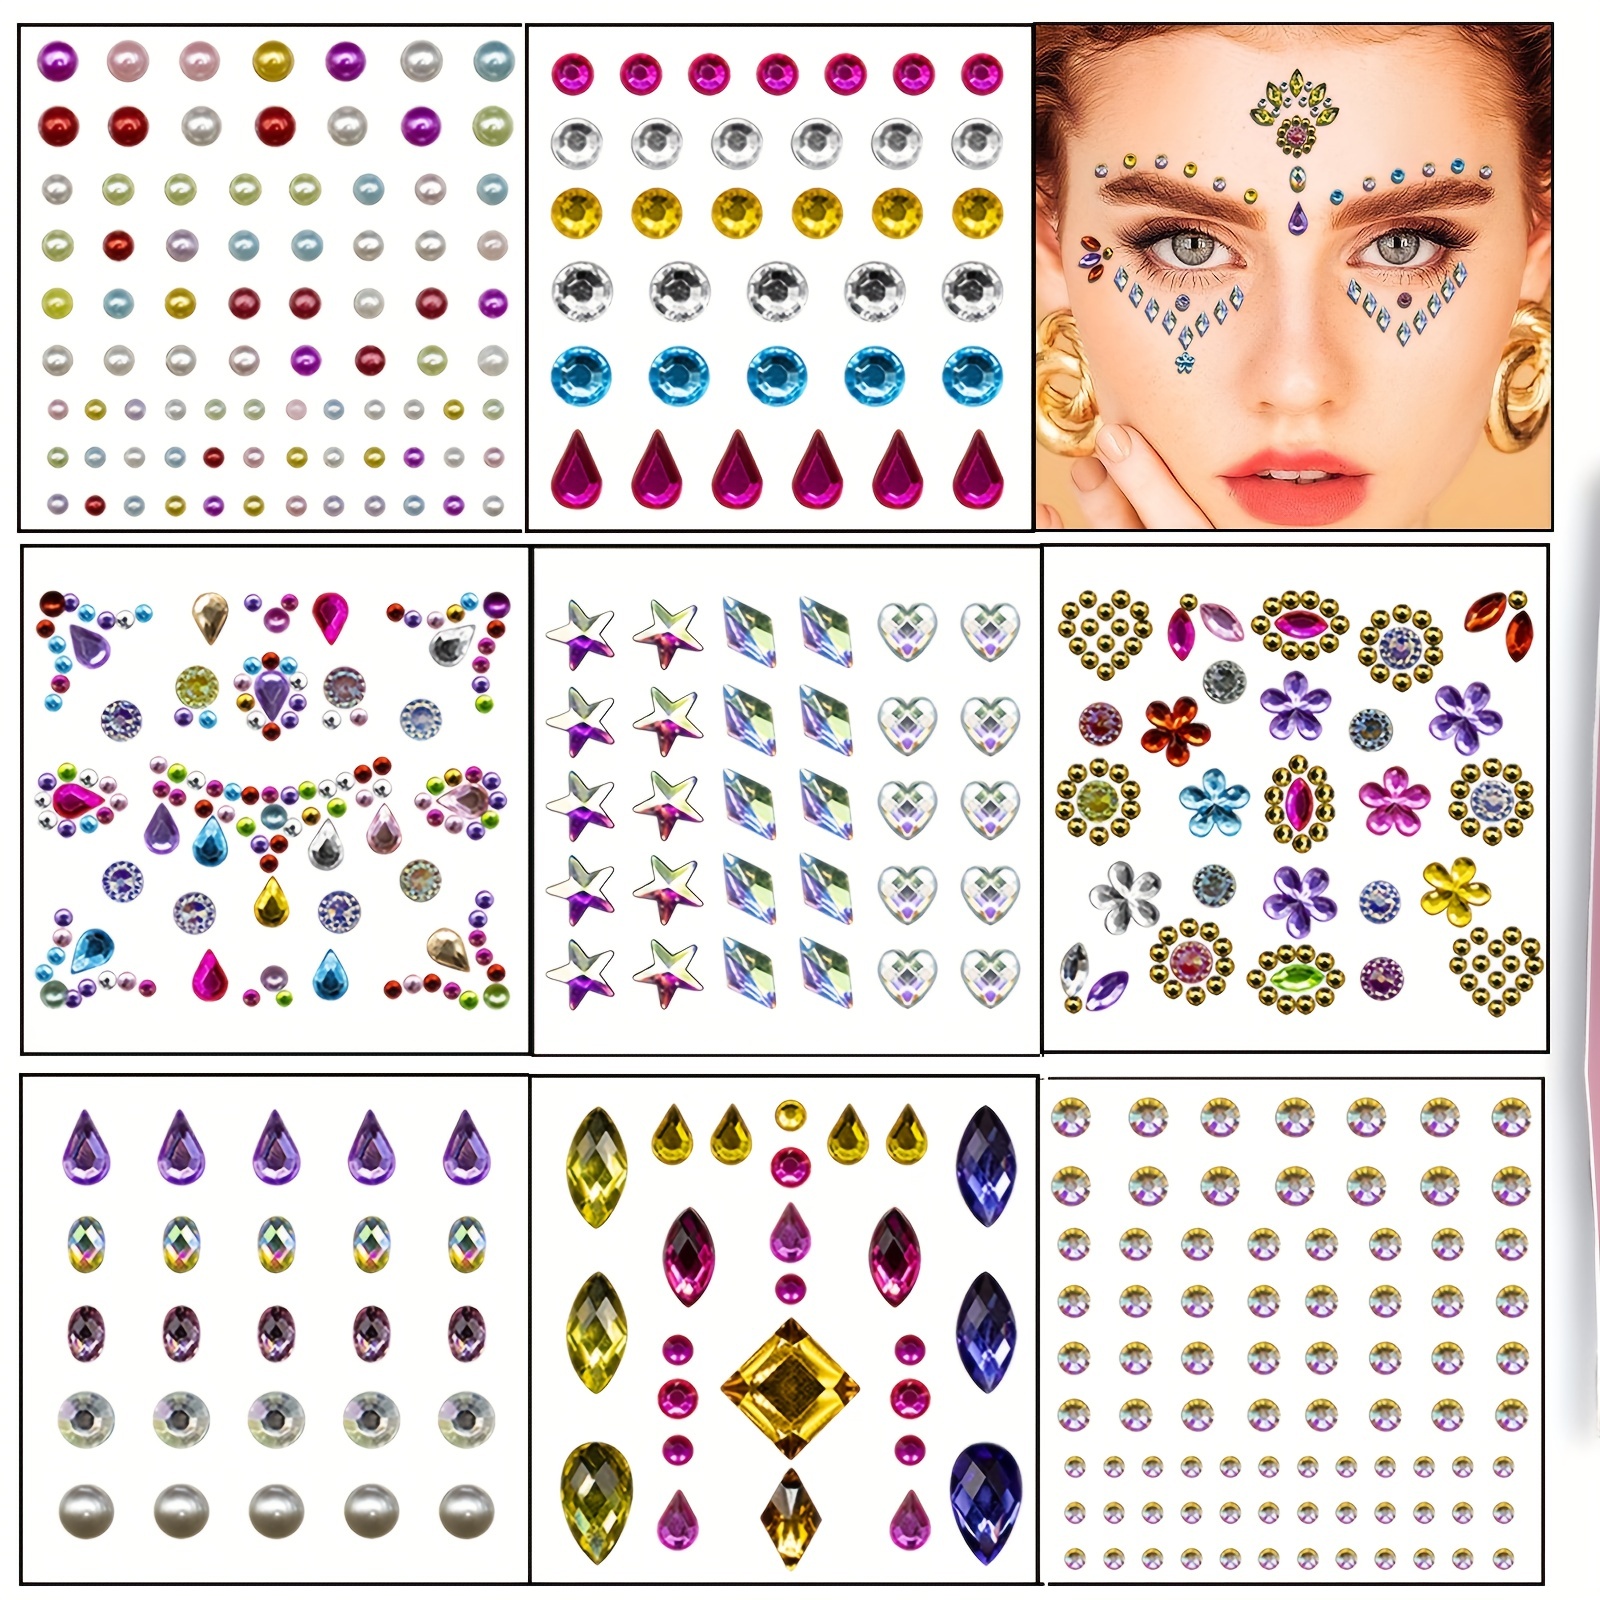 12 Sheets Eye Face Body Nail Jewels Self-Adhesive Rhinestone Stickers Stick  on Gems for Makeup Crafts Festival Accessory Decoration simple